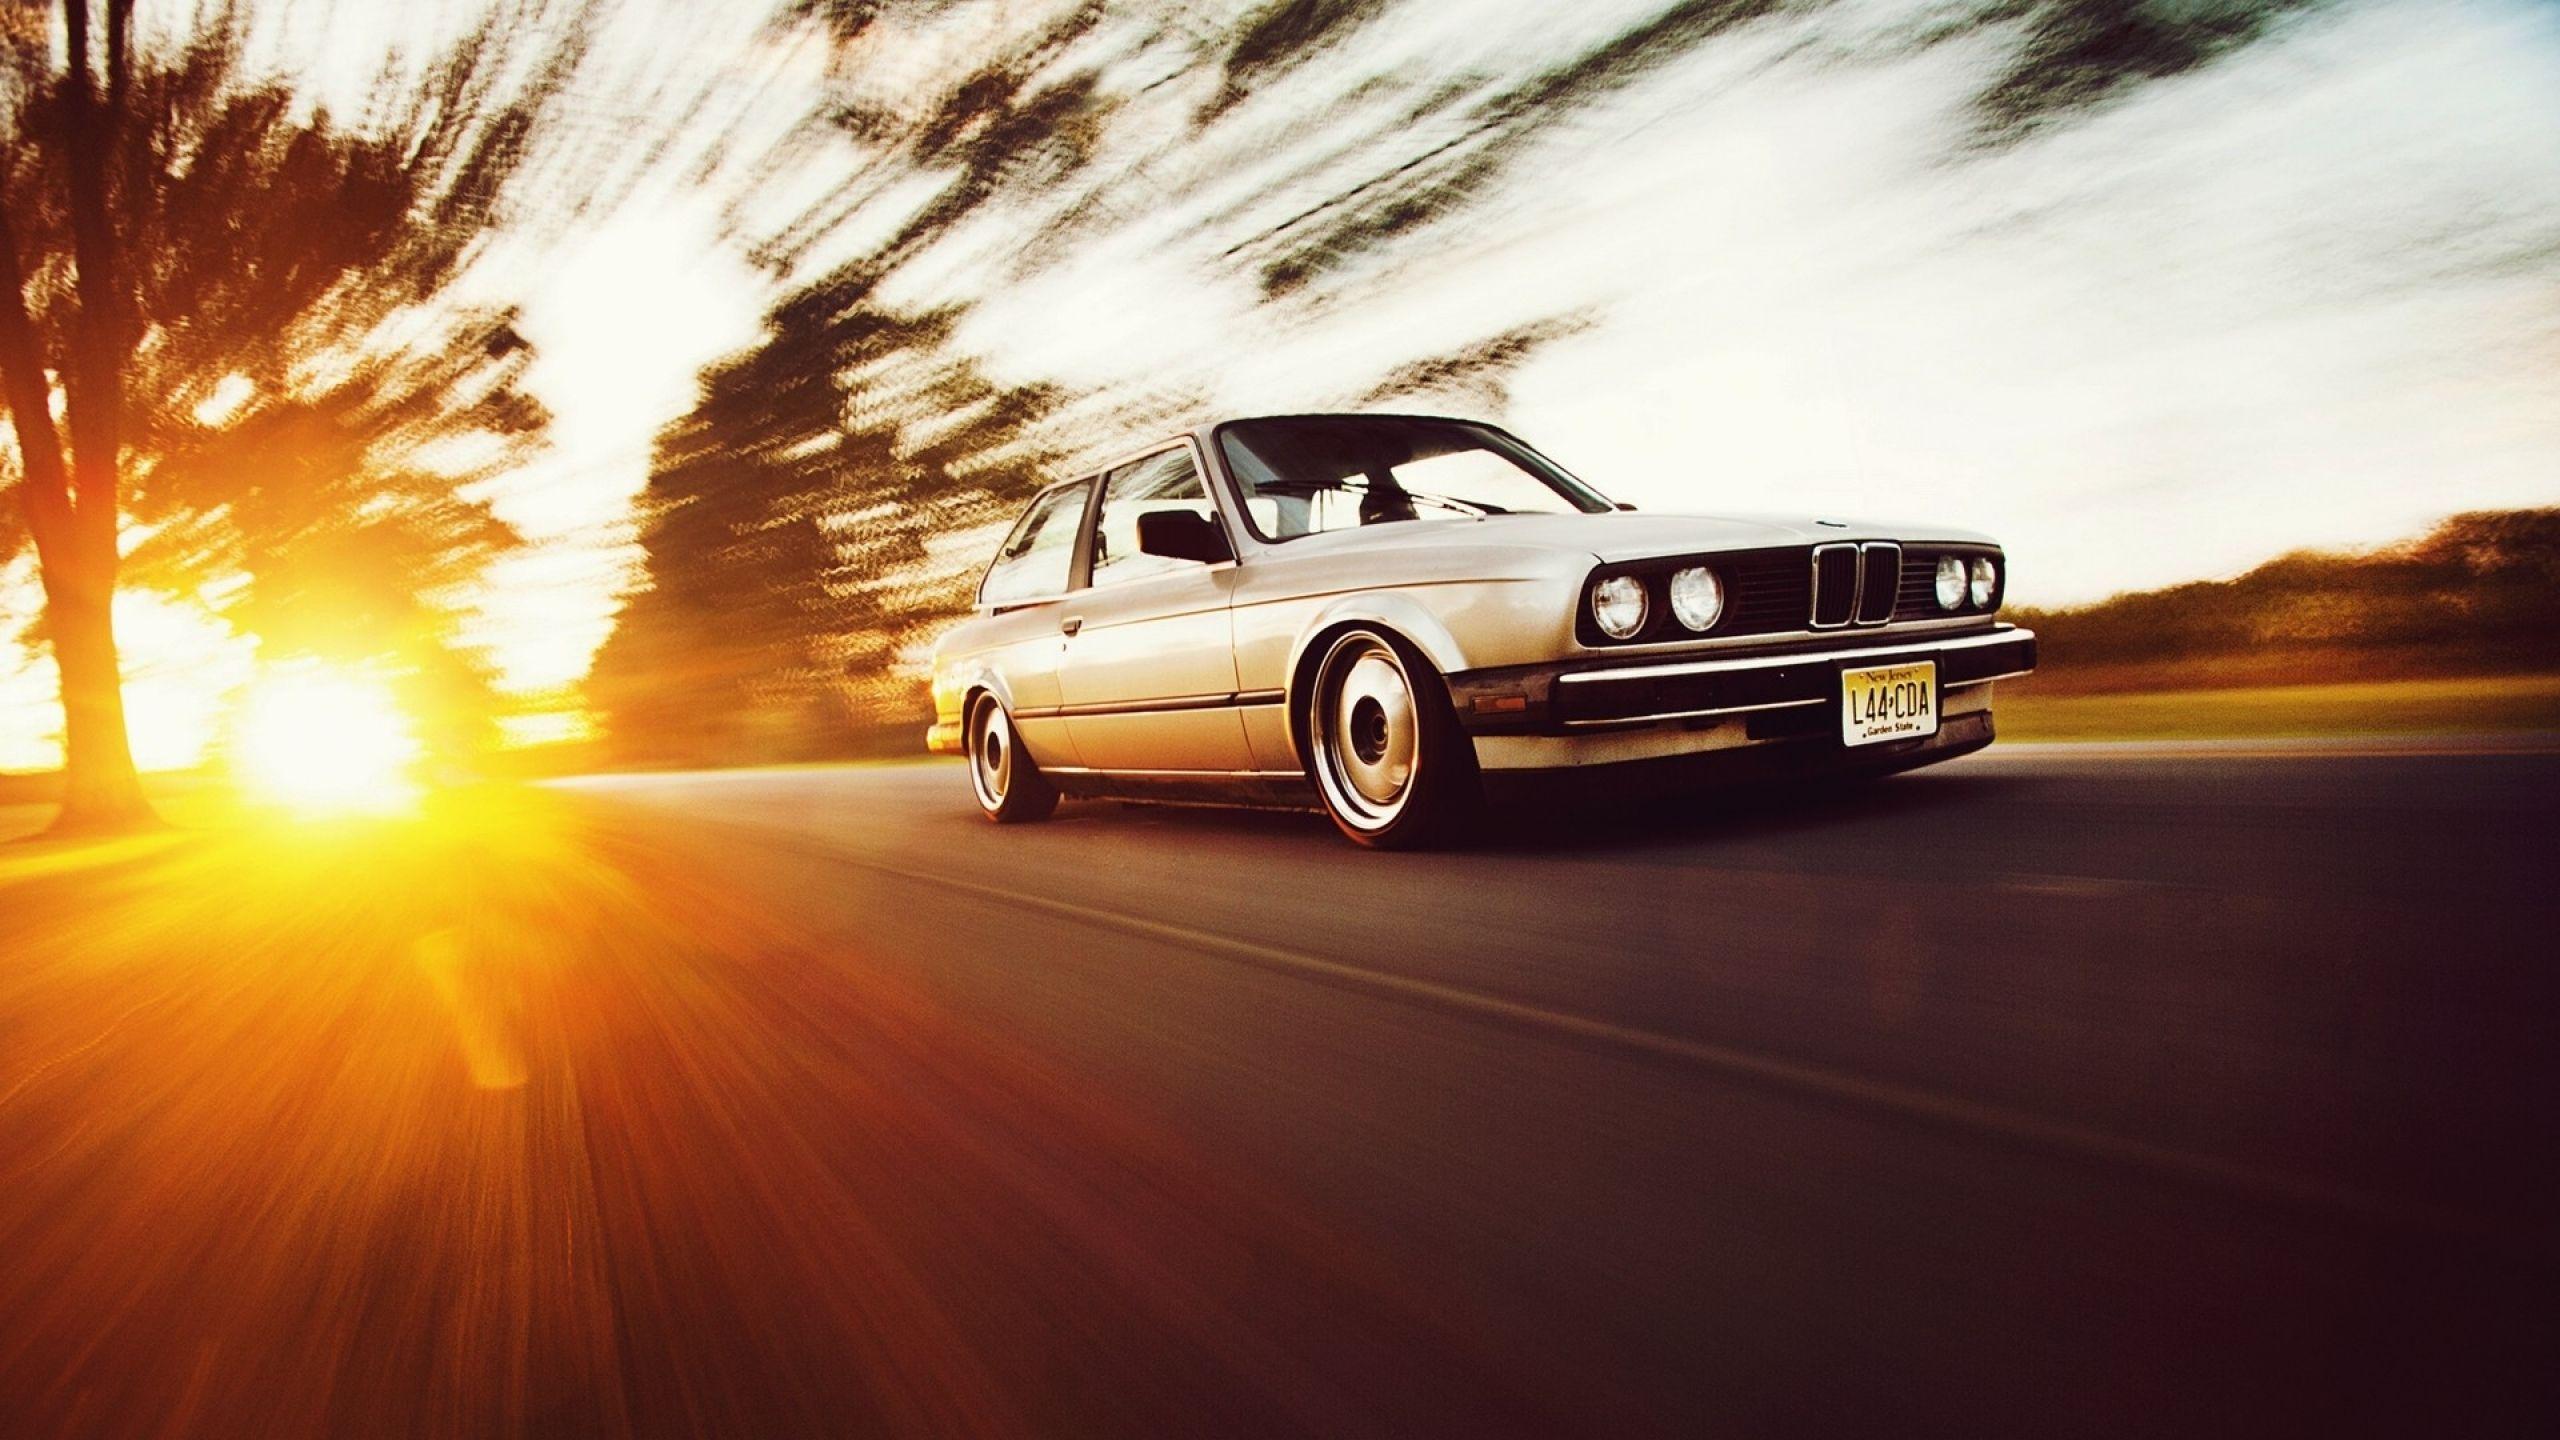 Bmw 320 Classic Wallpapers Top Free Bmw 320 Classic Backgrounds Wallpaperaccess